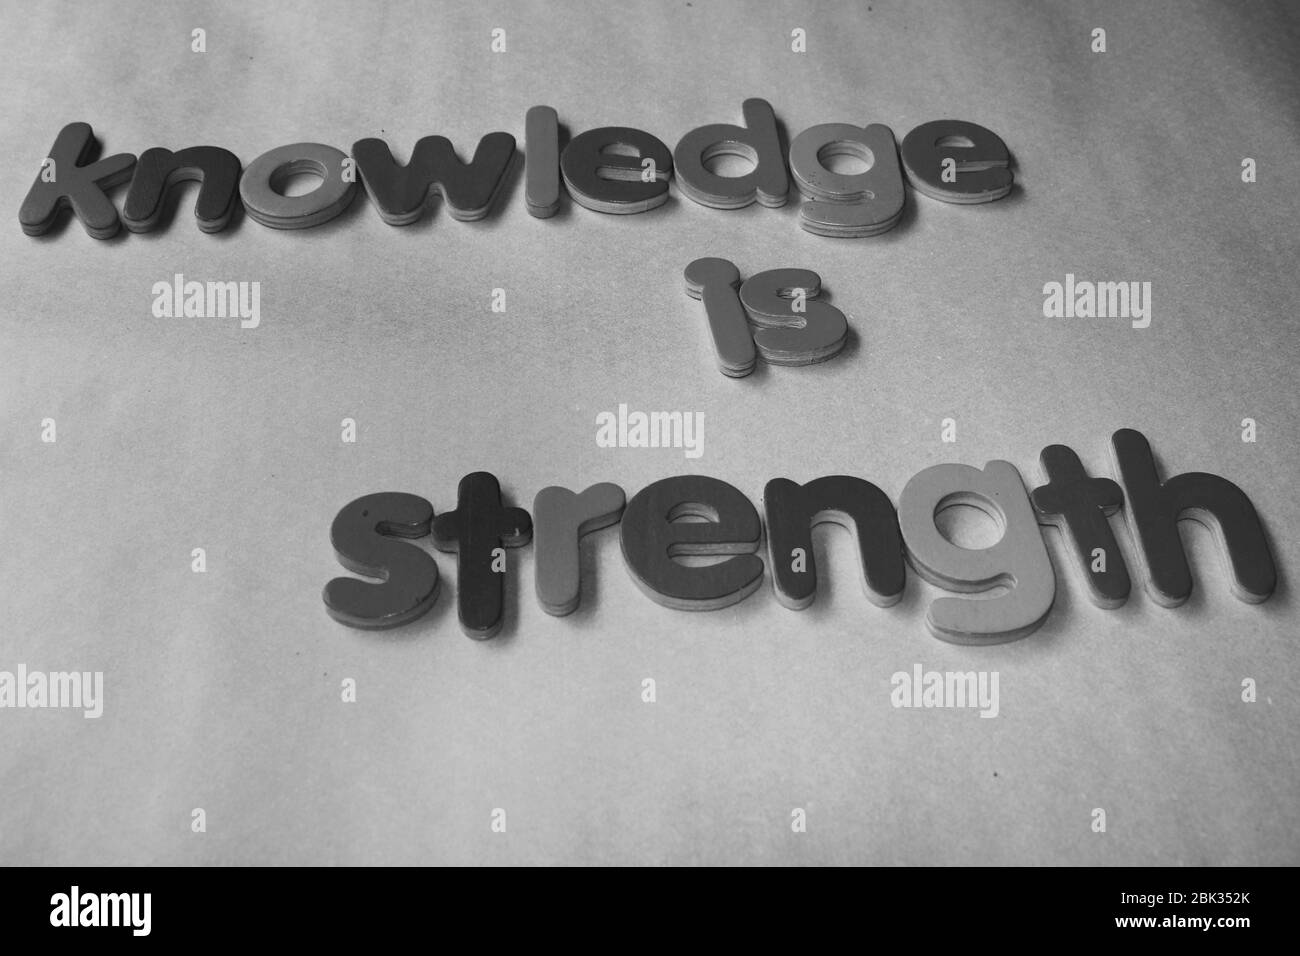 Knowledge is strength. Knowledge is strength written on wall by using the wooden English alphabet. Stock Photo